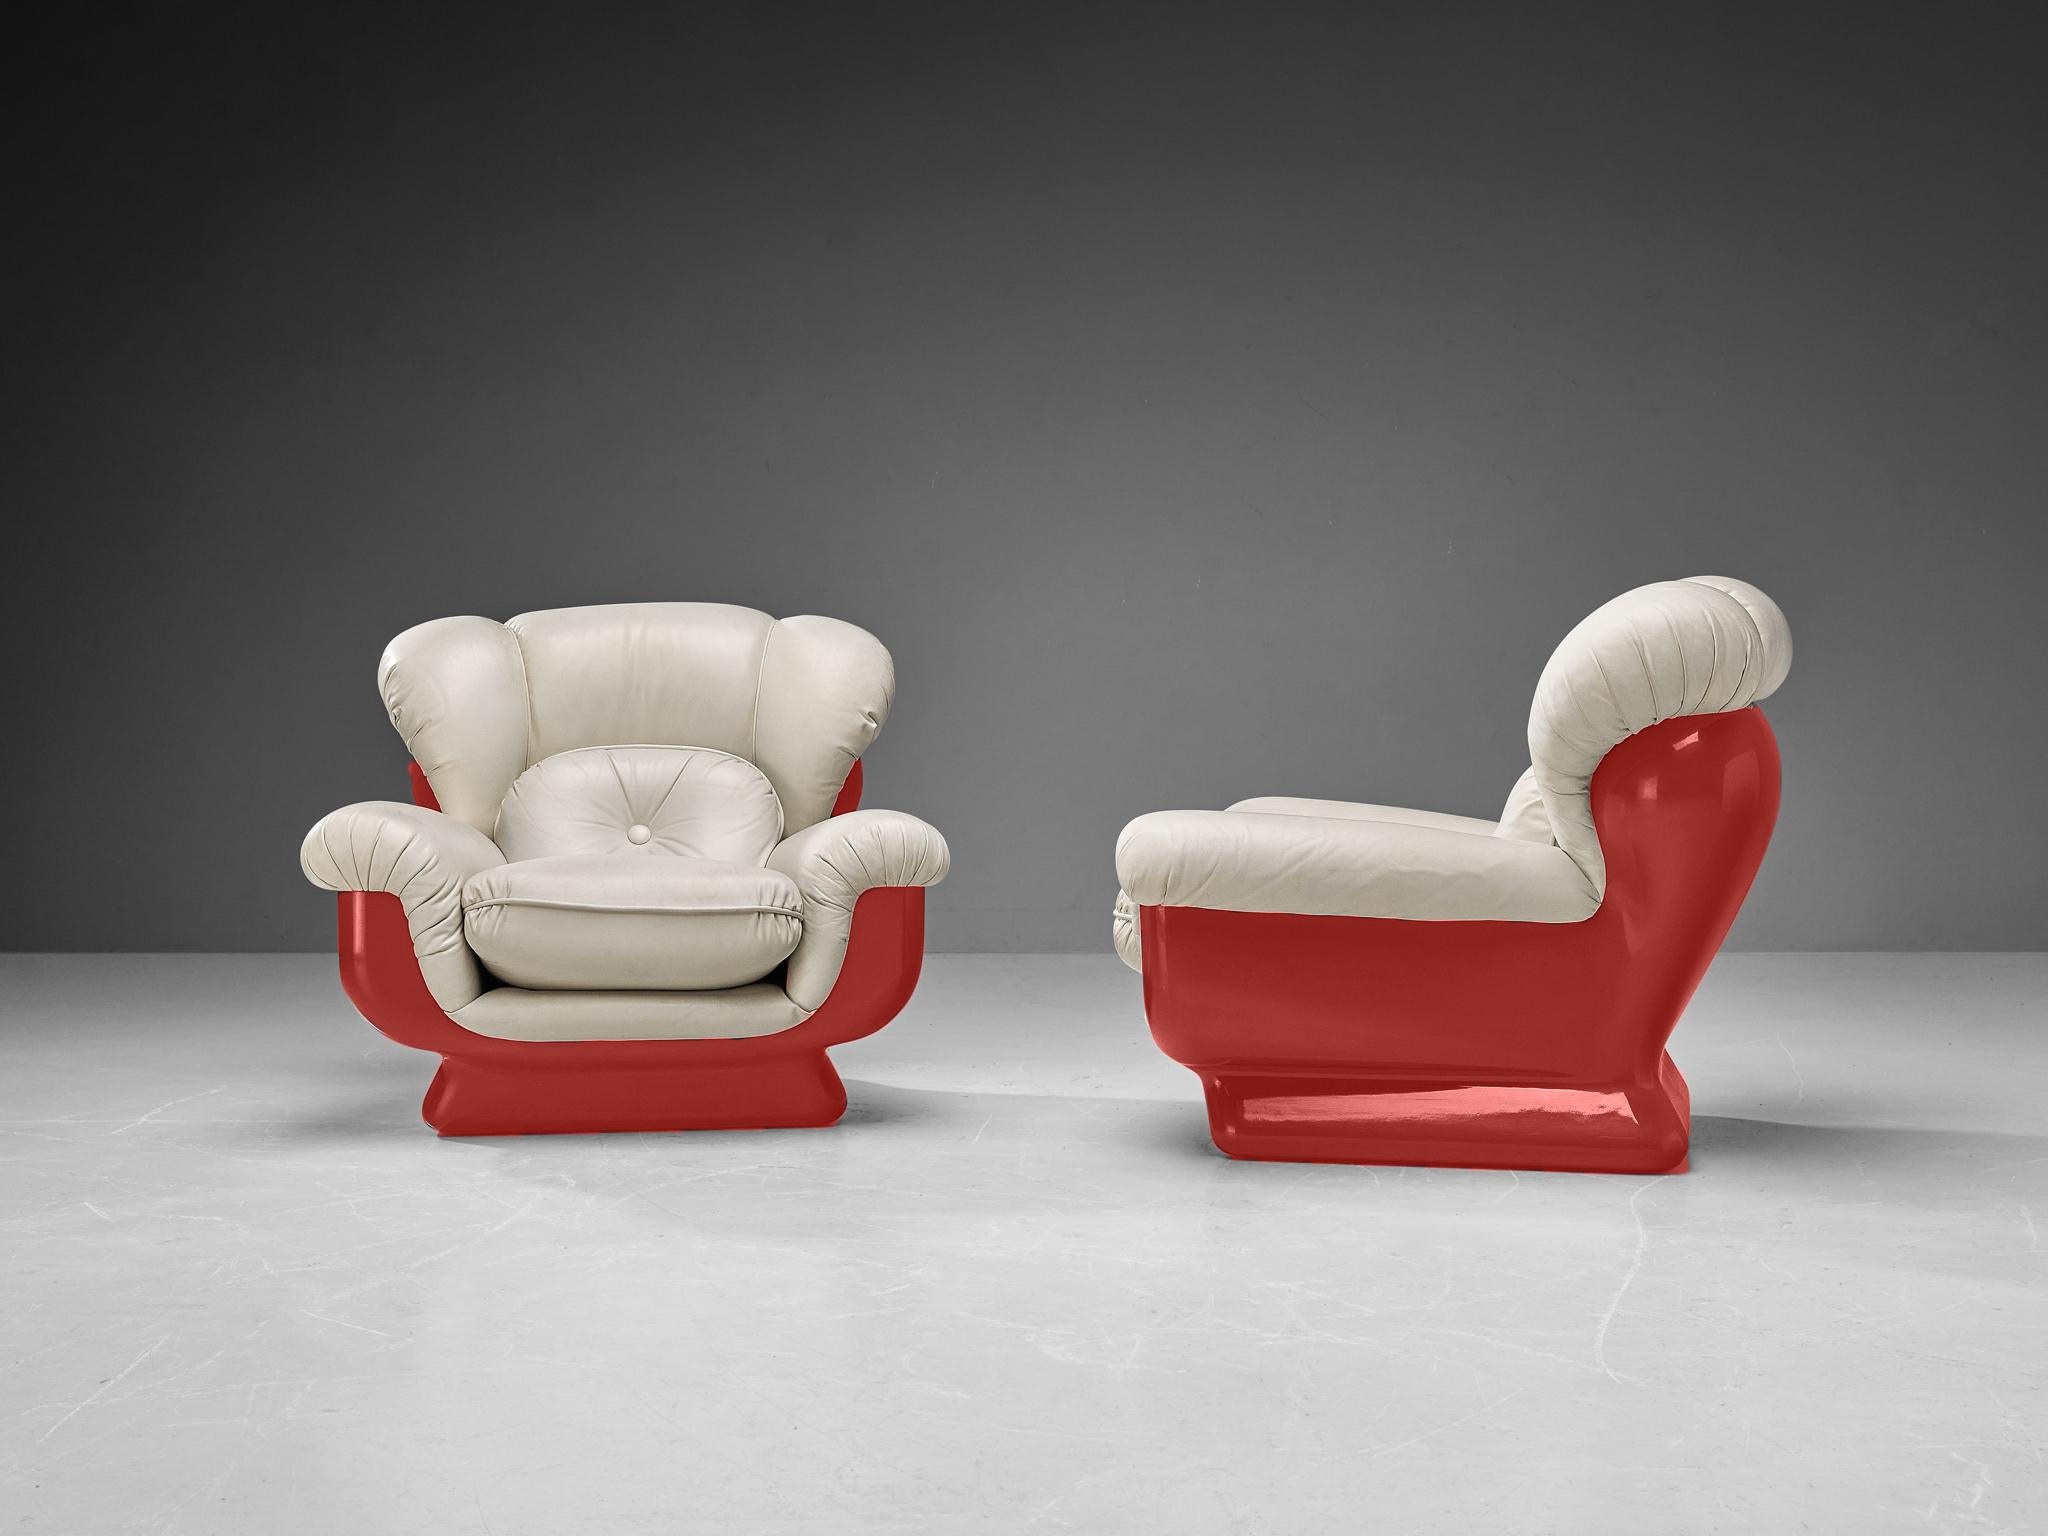 Pair of lounge chairs, fiberglass, faux leather, Italy, 1970s

A pair of very enjoyable bulky easy chairs in leatherette. These chairs are the ideal fit for anyone looking for comfort. The large cushioning makes the sitter feel like they are gliding